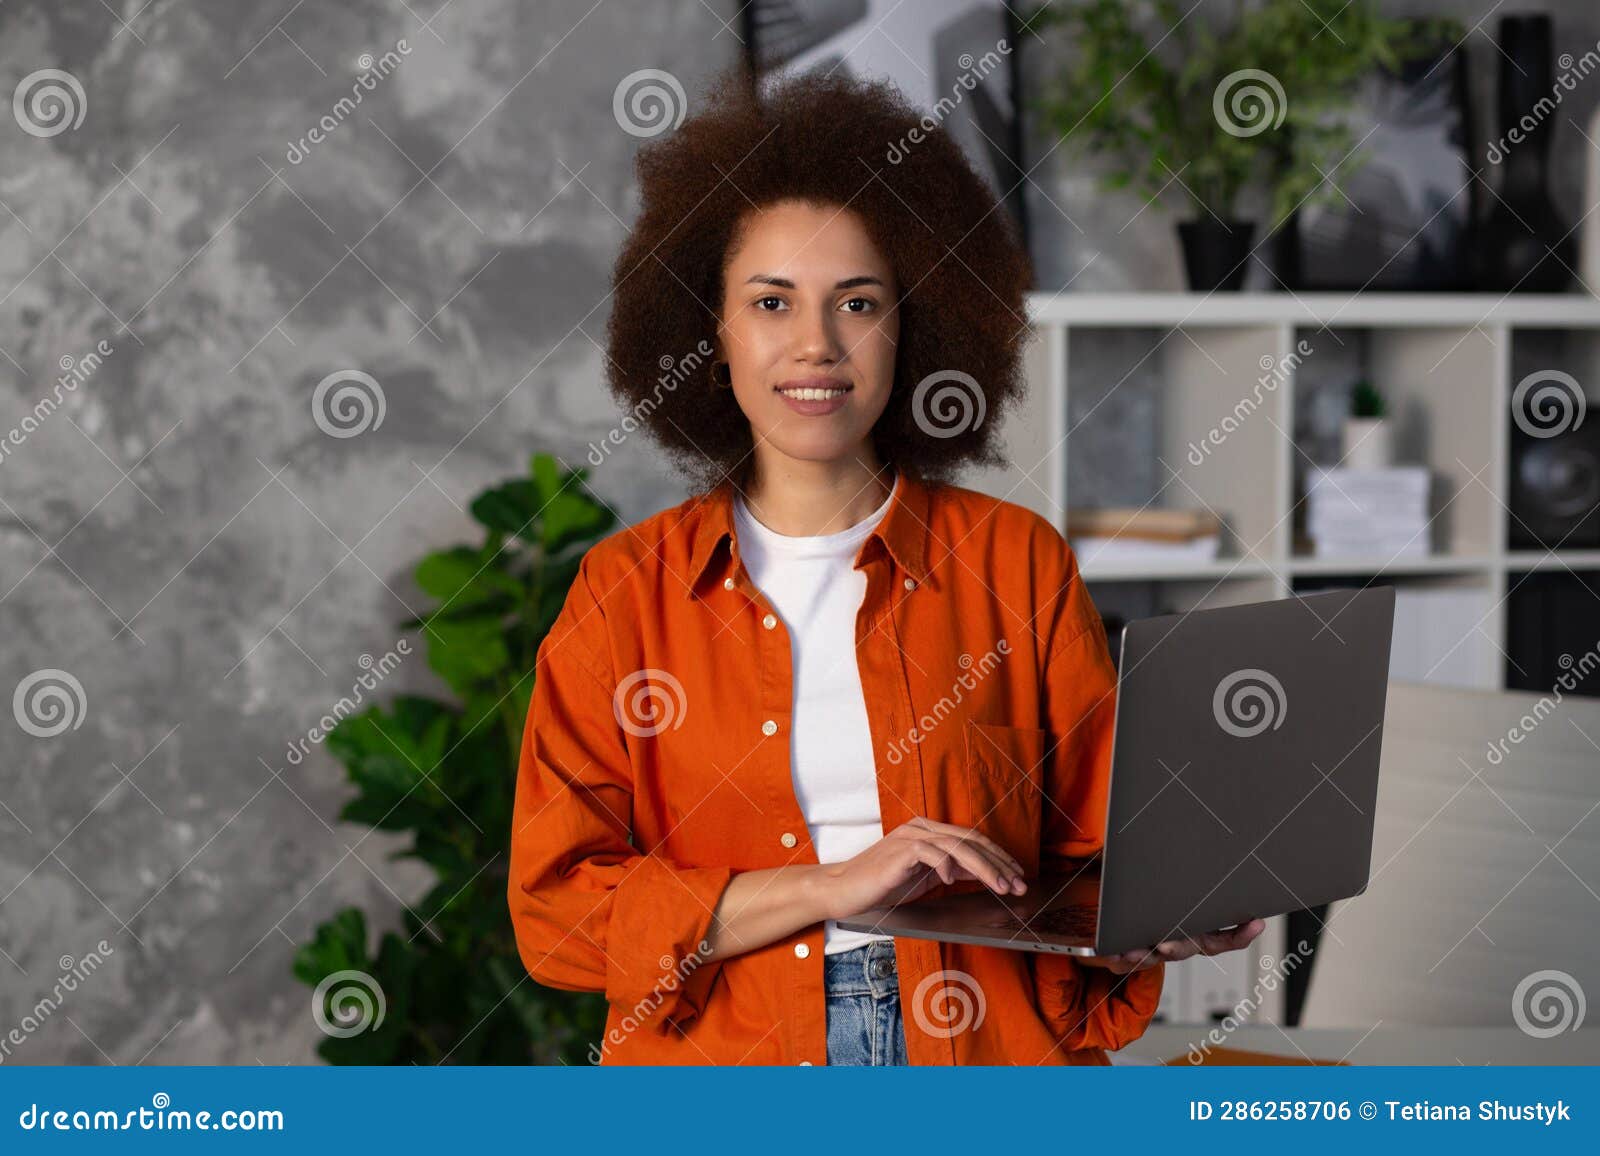 young successful african american woman entrepreneur, ffice worker or ceo working using laptop, stands in modern office or